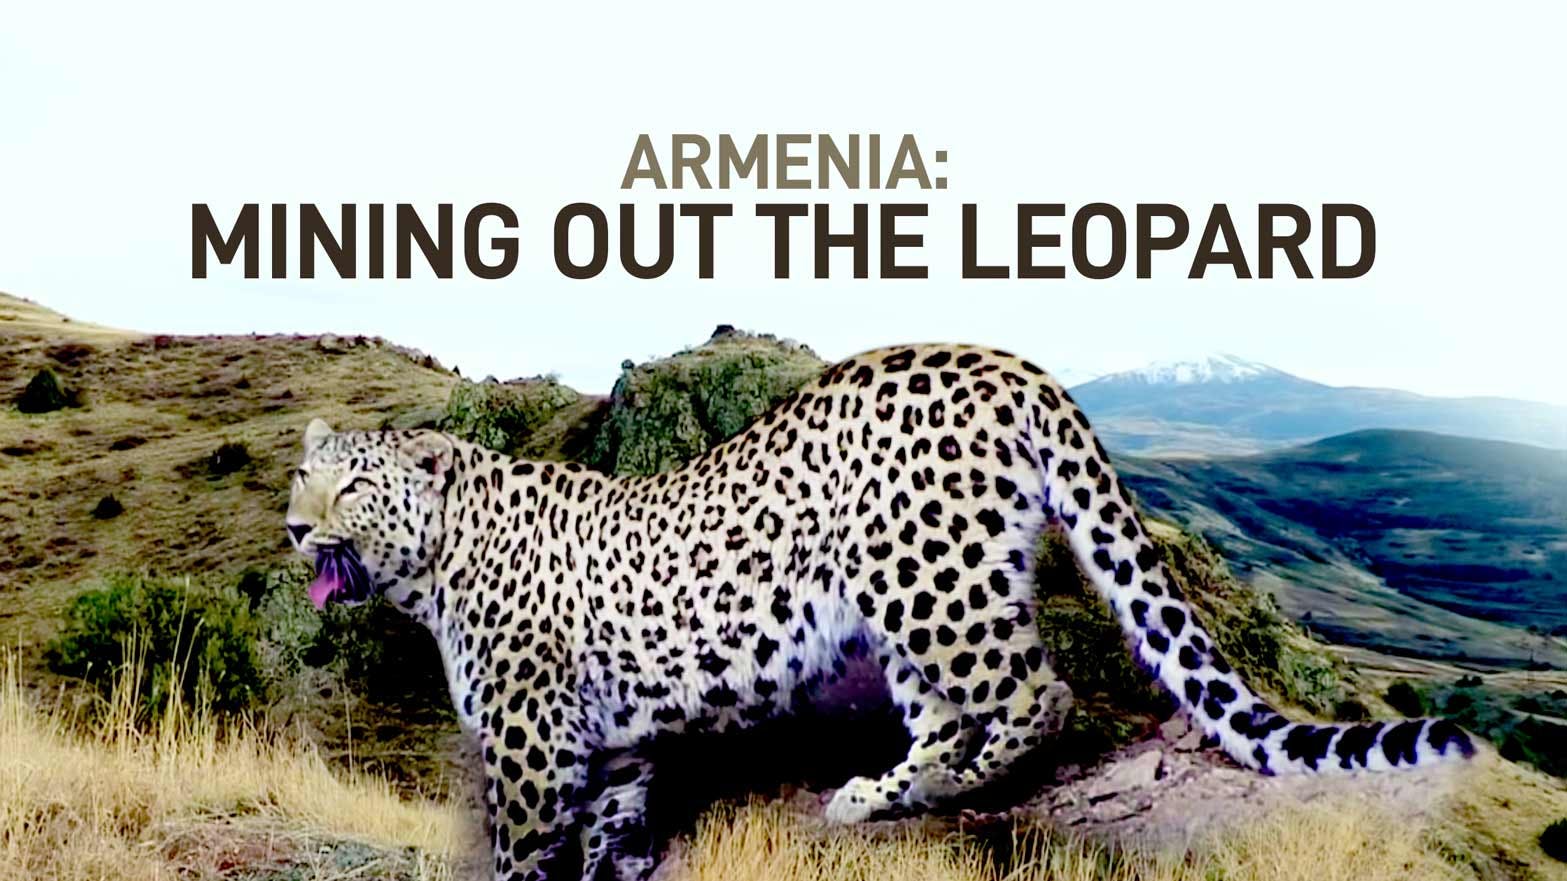 Armenia: Mining Out the Leopard